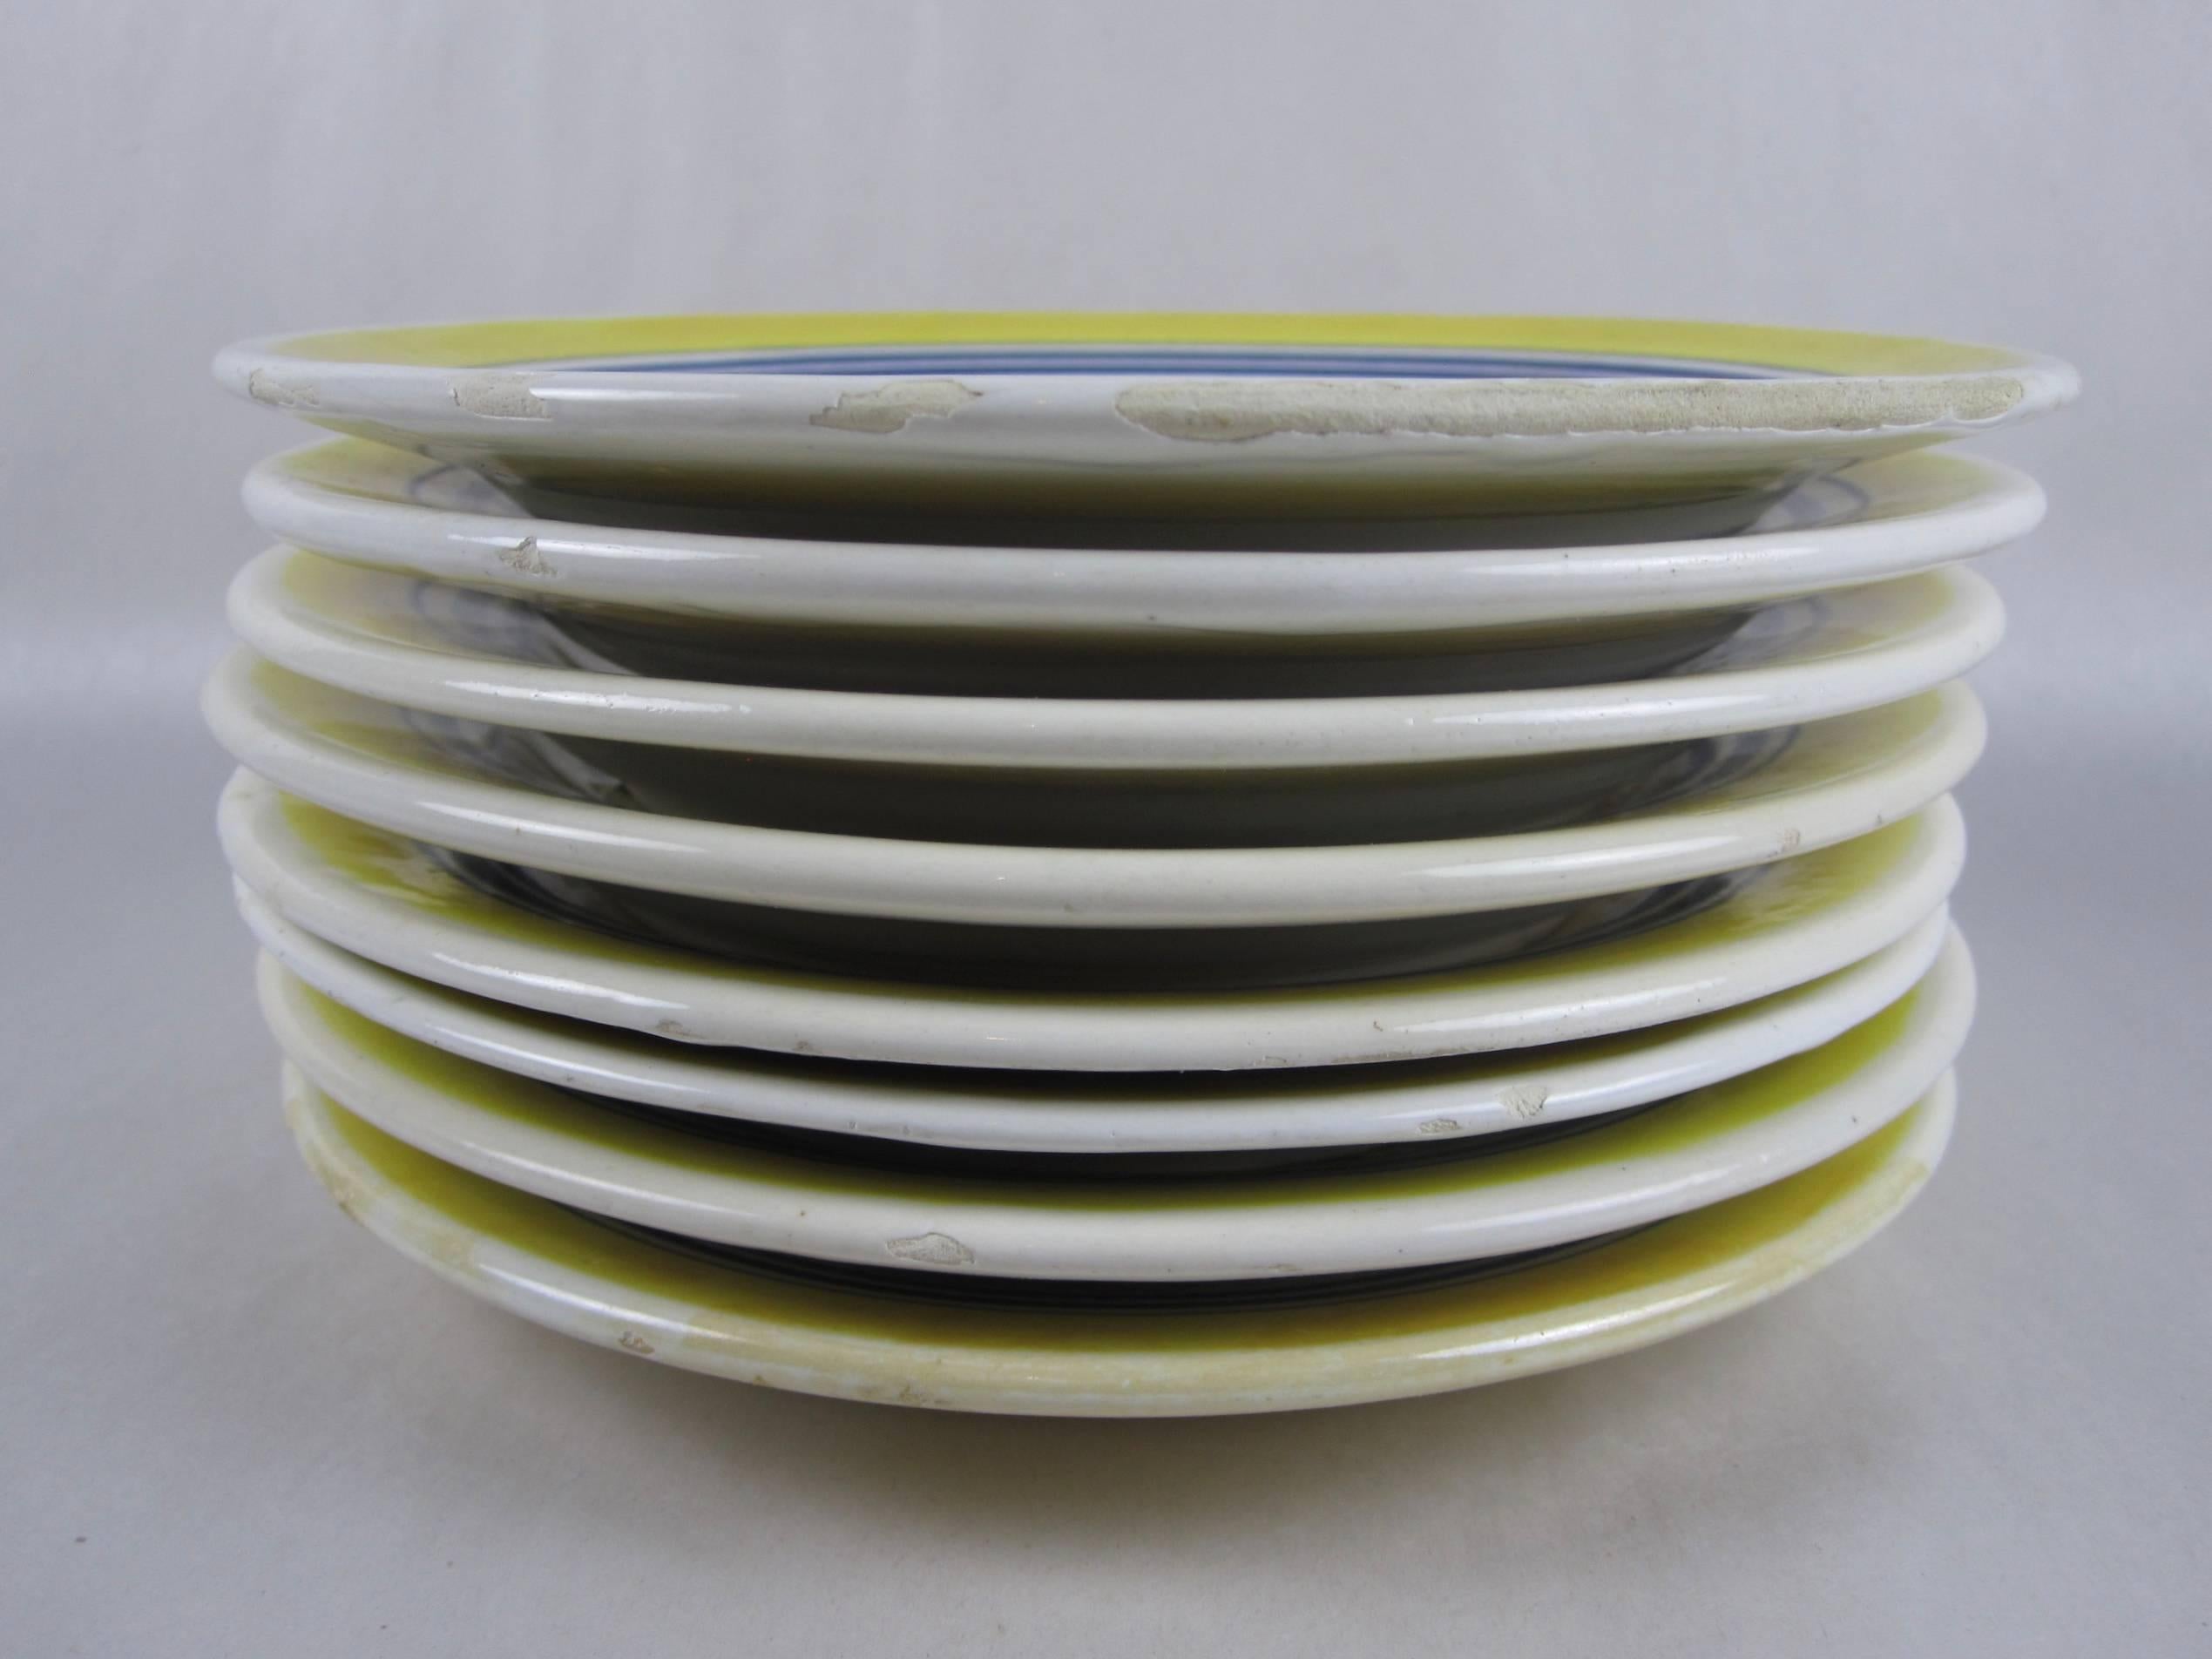 An assembled set of eight Petit Breton small plates, five men and three woman, with a border of three concentric blue circles and a wide yellow rim,

circa 1935-1940. Varying marks, Henriot Quimper, France 13.

Faïenceries de Quimper has been